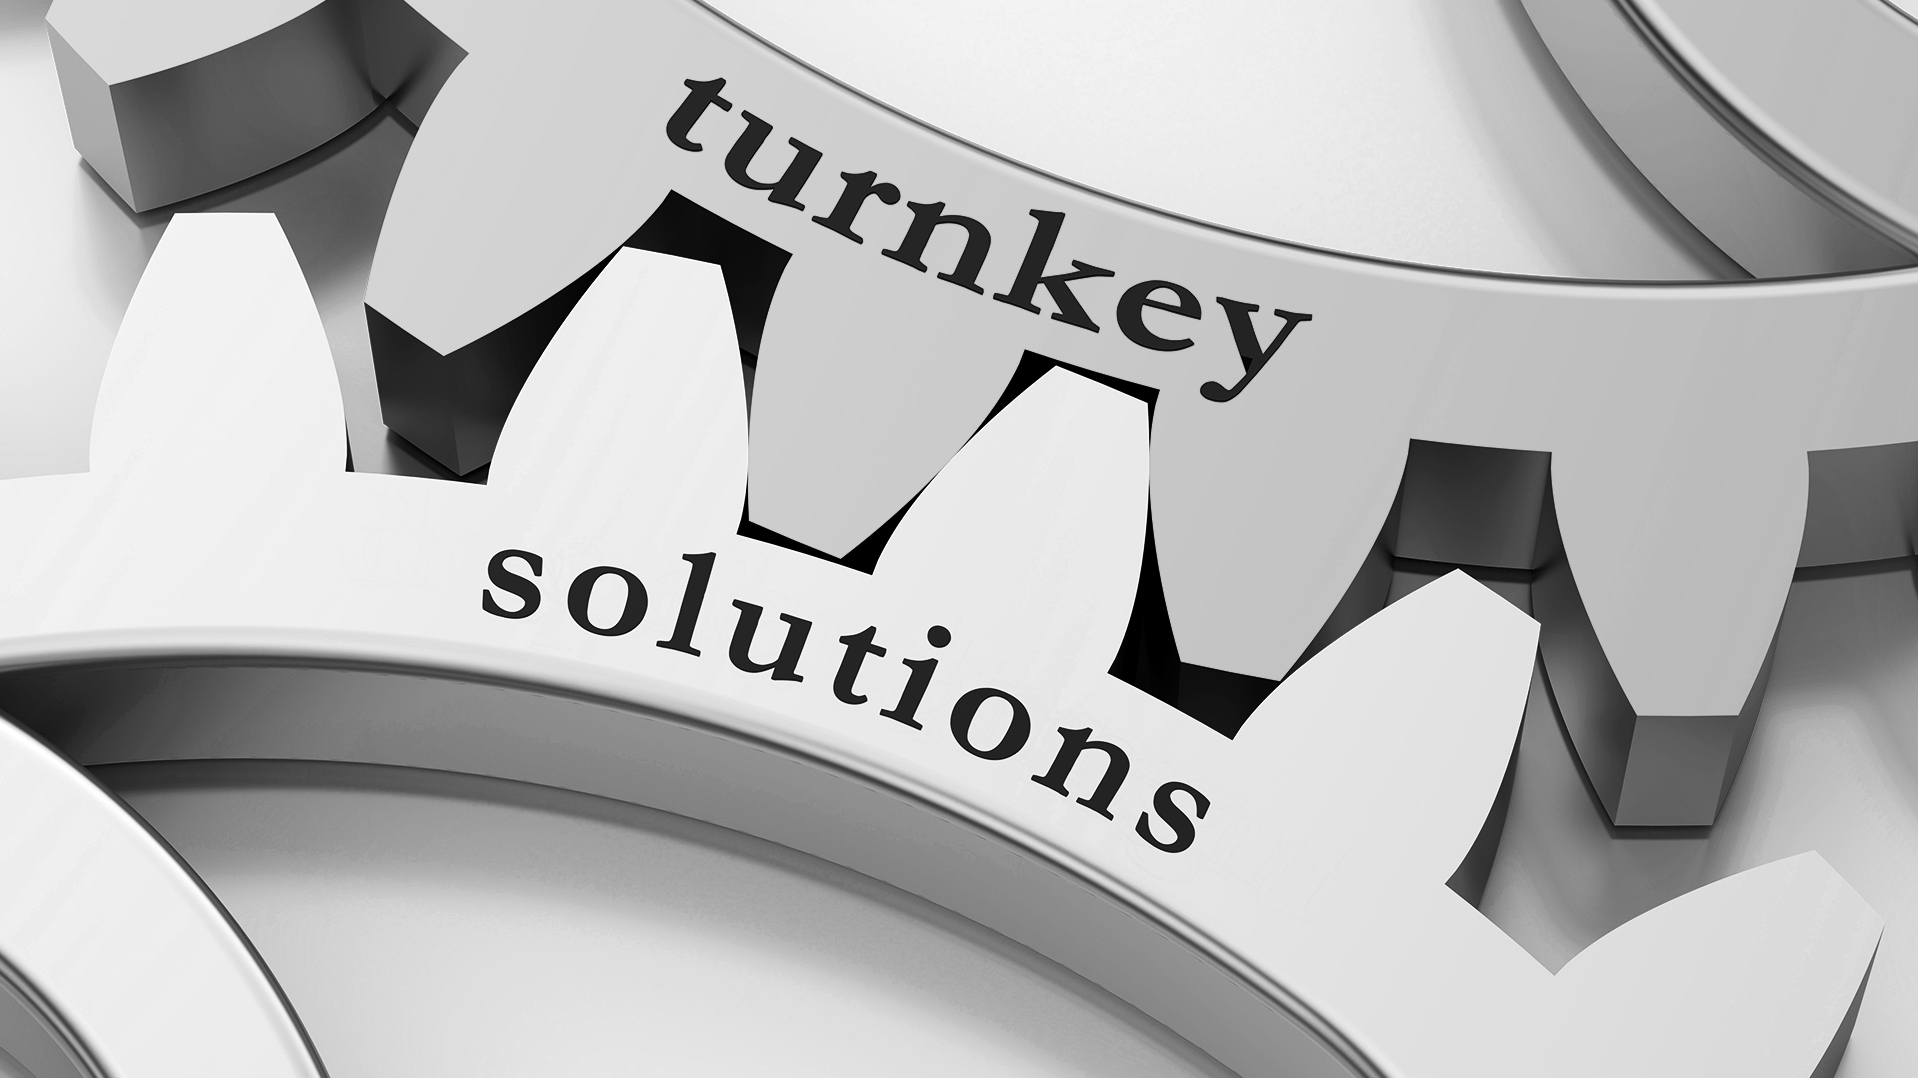 Turnkey Solutions